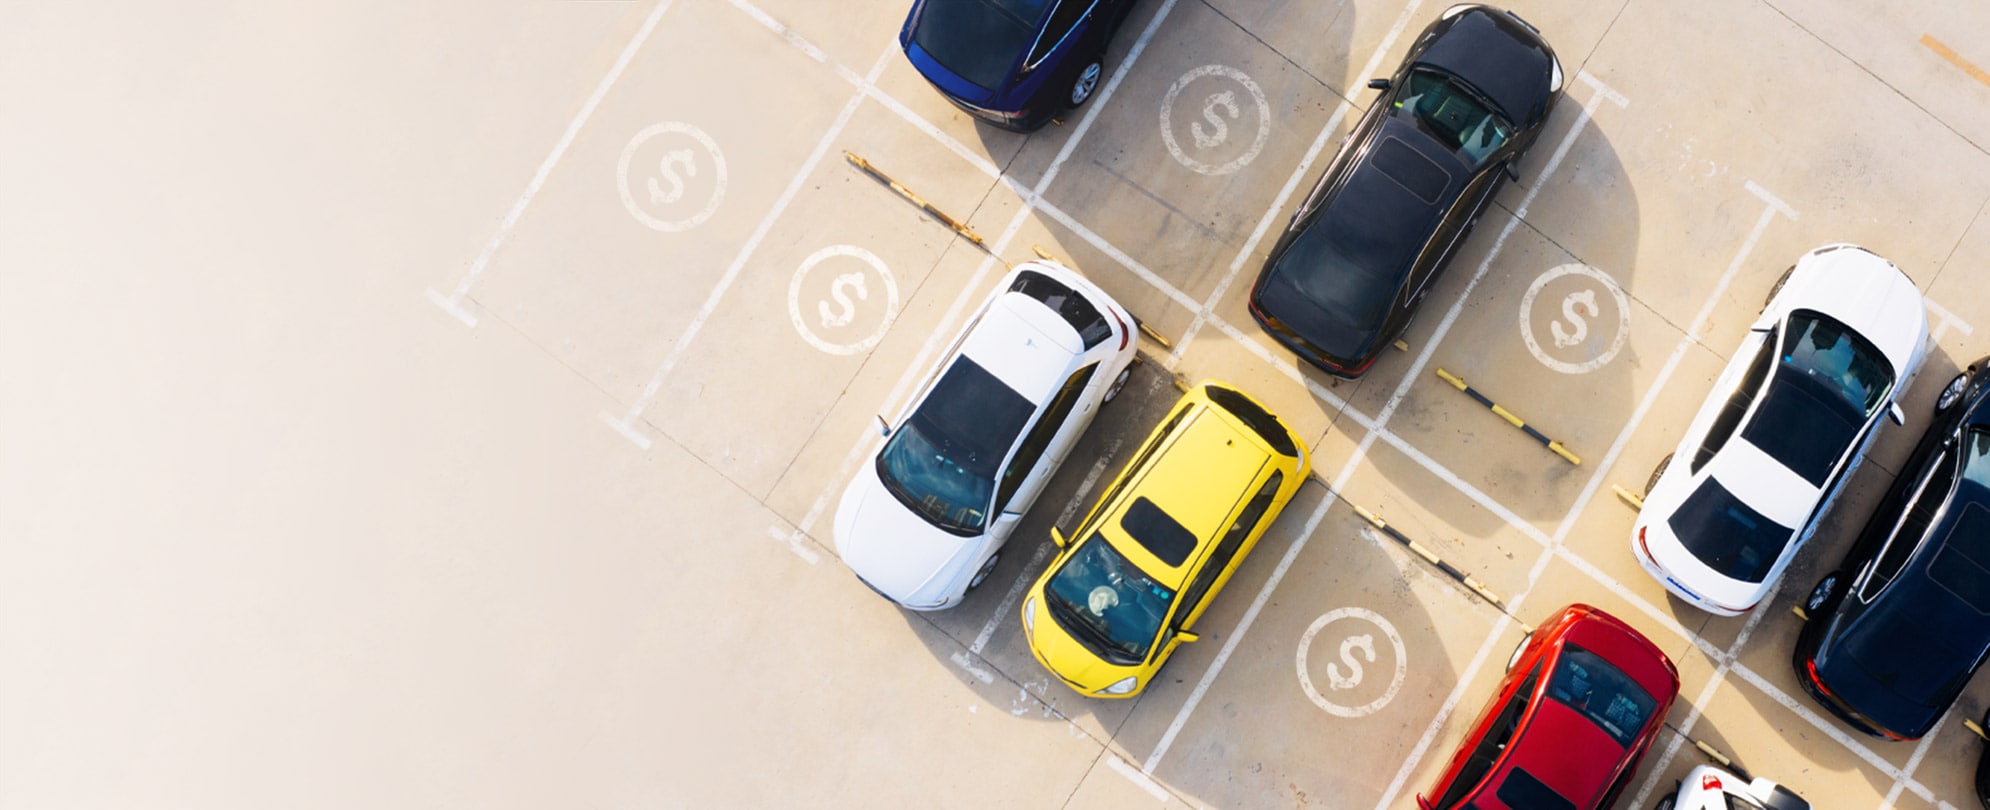 Overhead view of a parking lot with cars in some spaces, while empty spaces are marked with dollar signs.